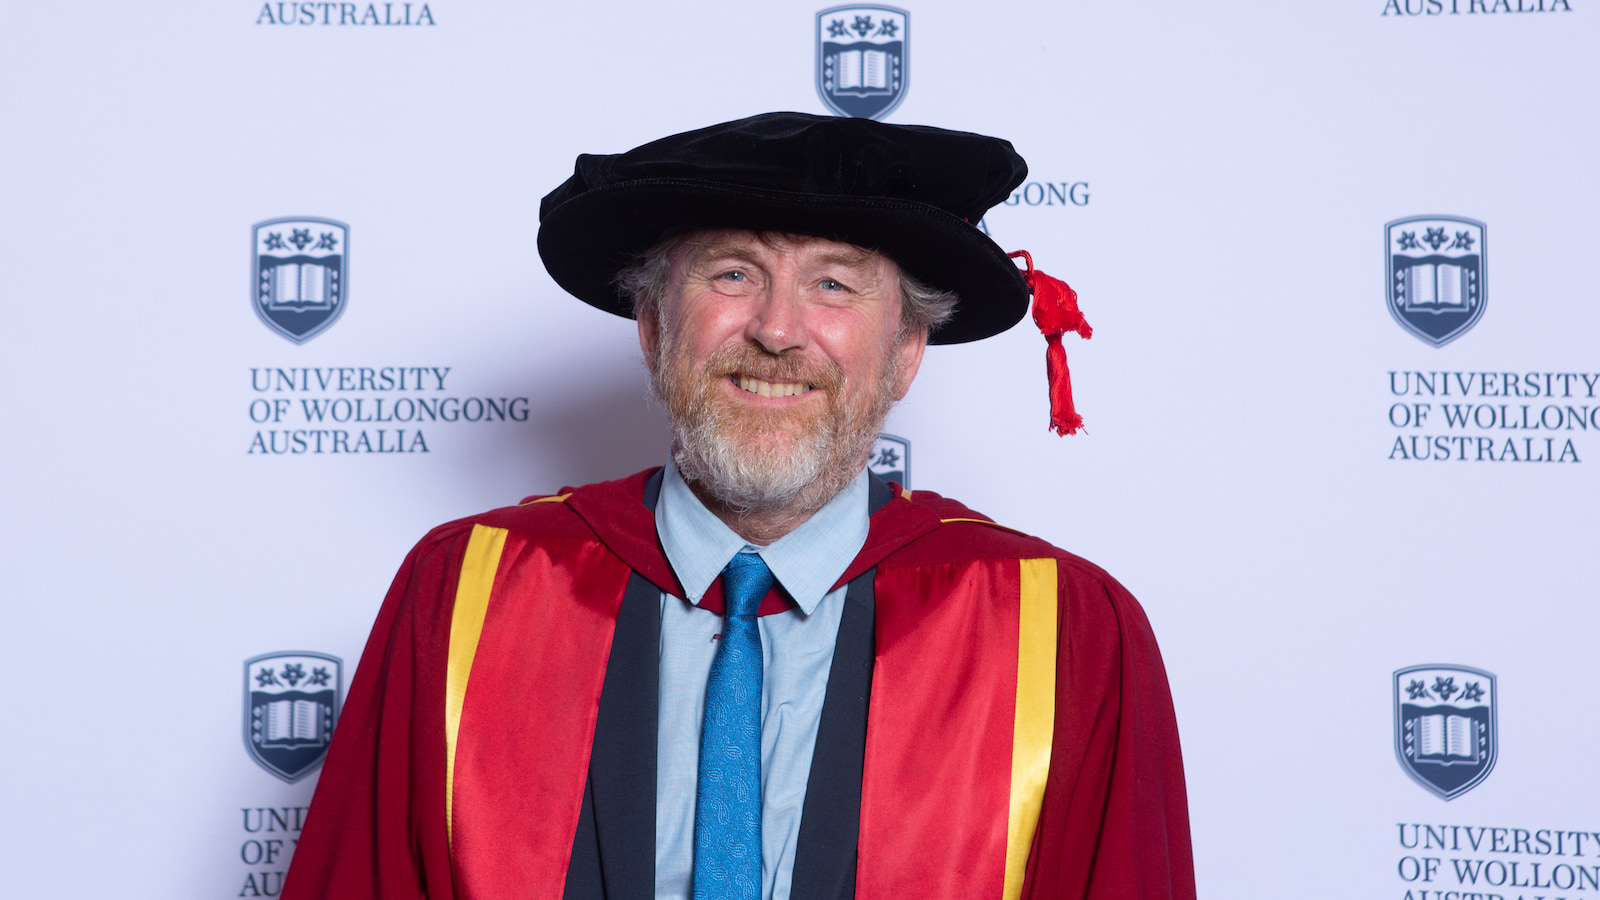 Professor Will Price, wearing a maroon graduation gown and black cap. Photo: Andy Zakeli